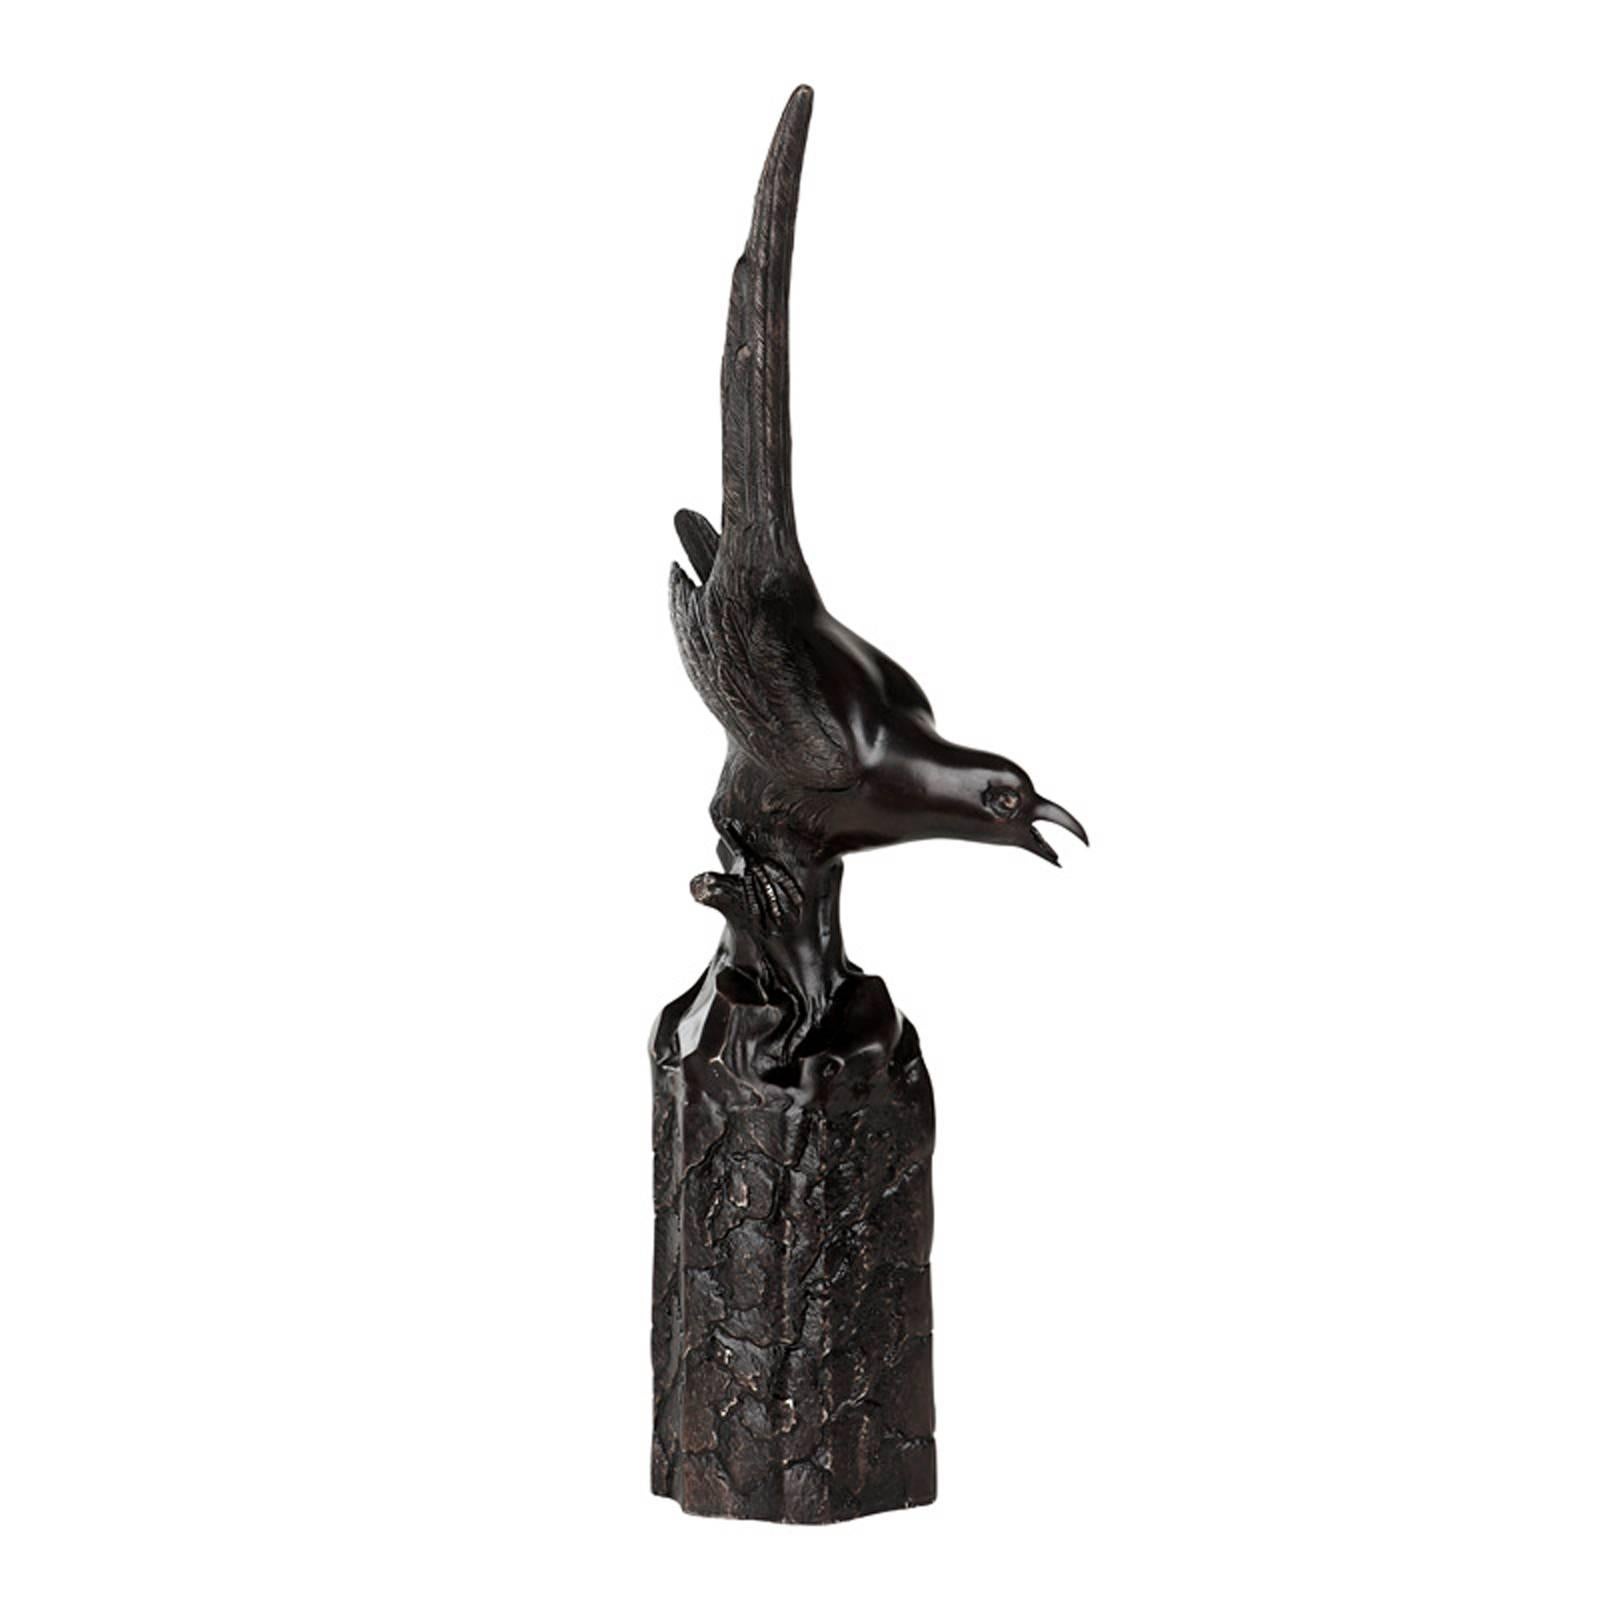 Set of two bookends birdy in bronze,
highlight finish. Subtle and elegant piece.
